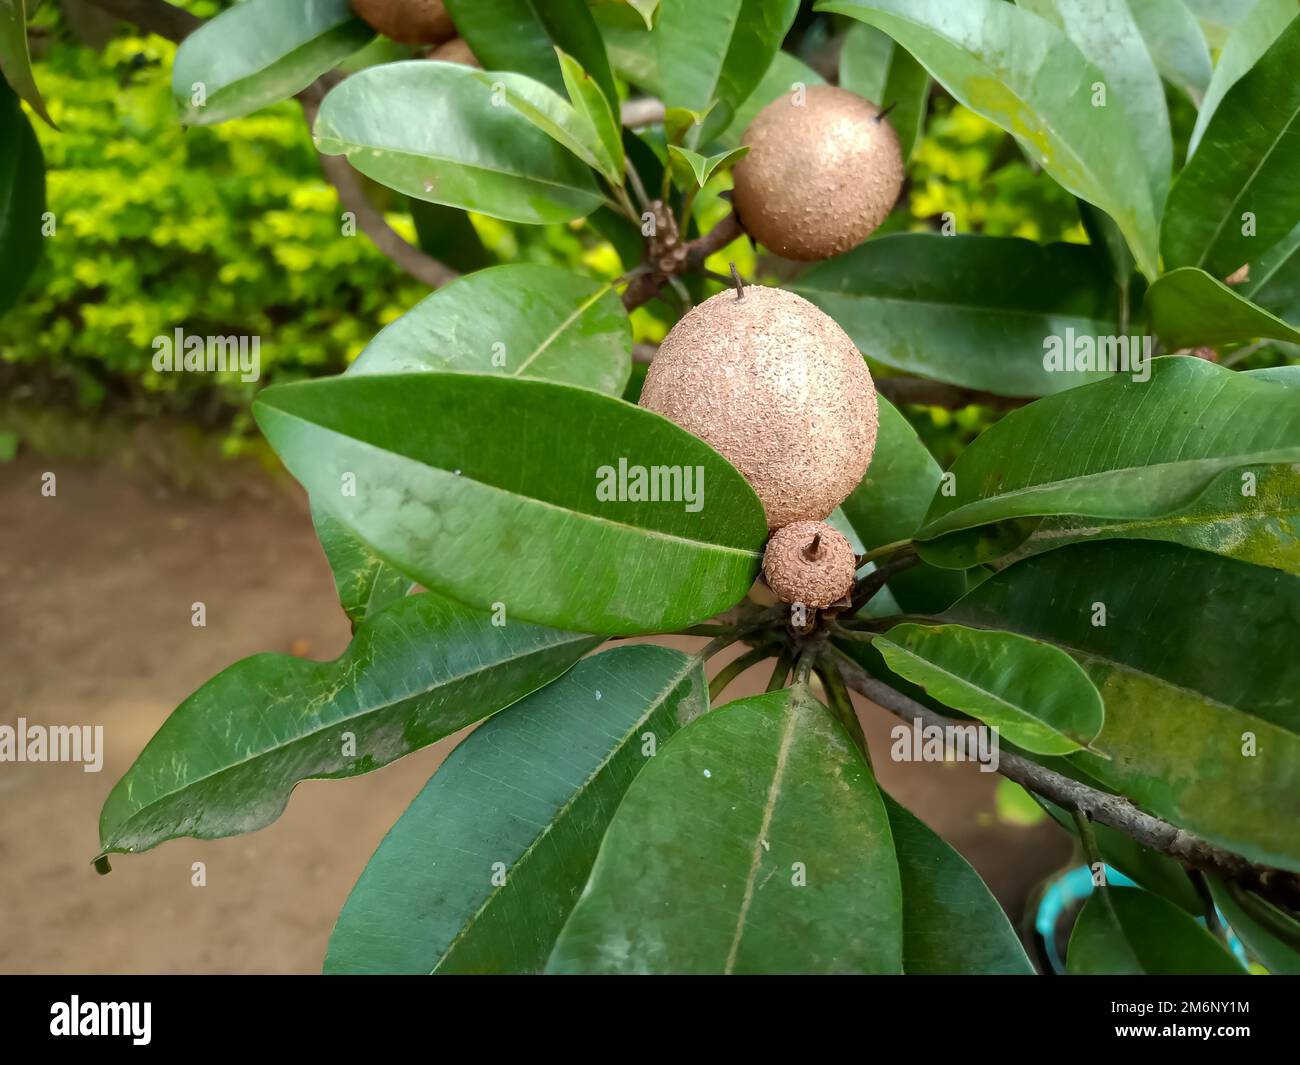 Chiku fruits tree in Indian agriculture farm Stock Photo